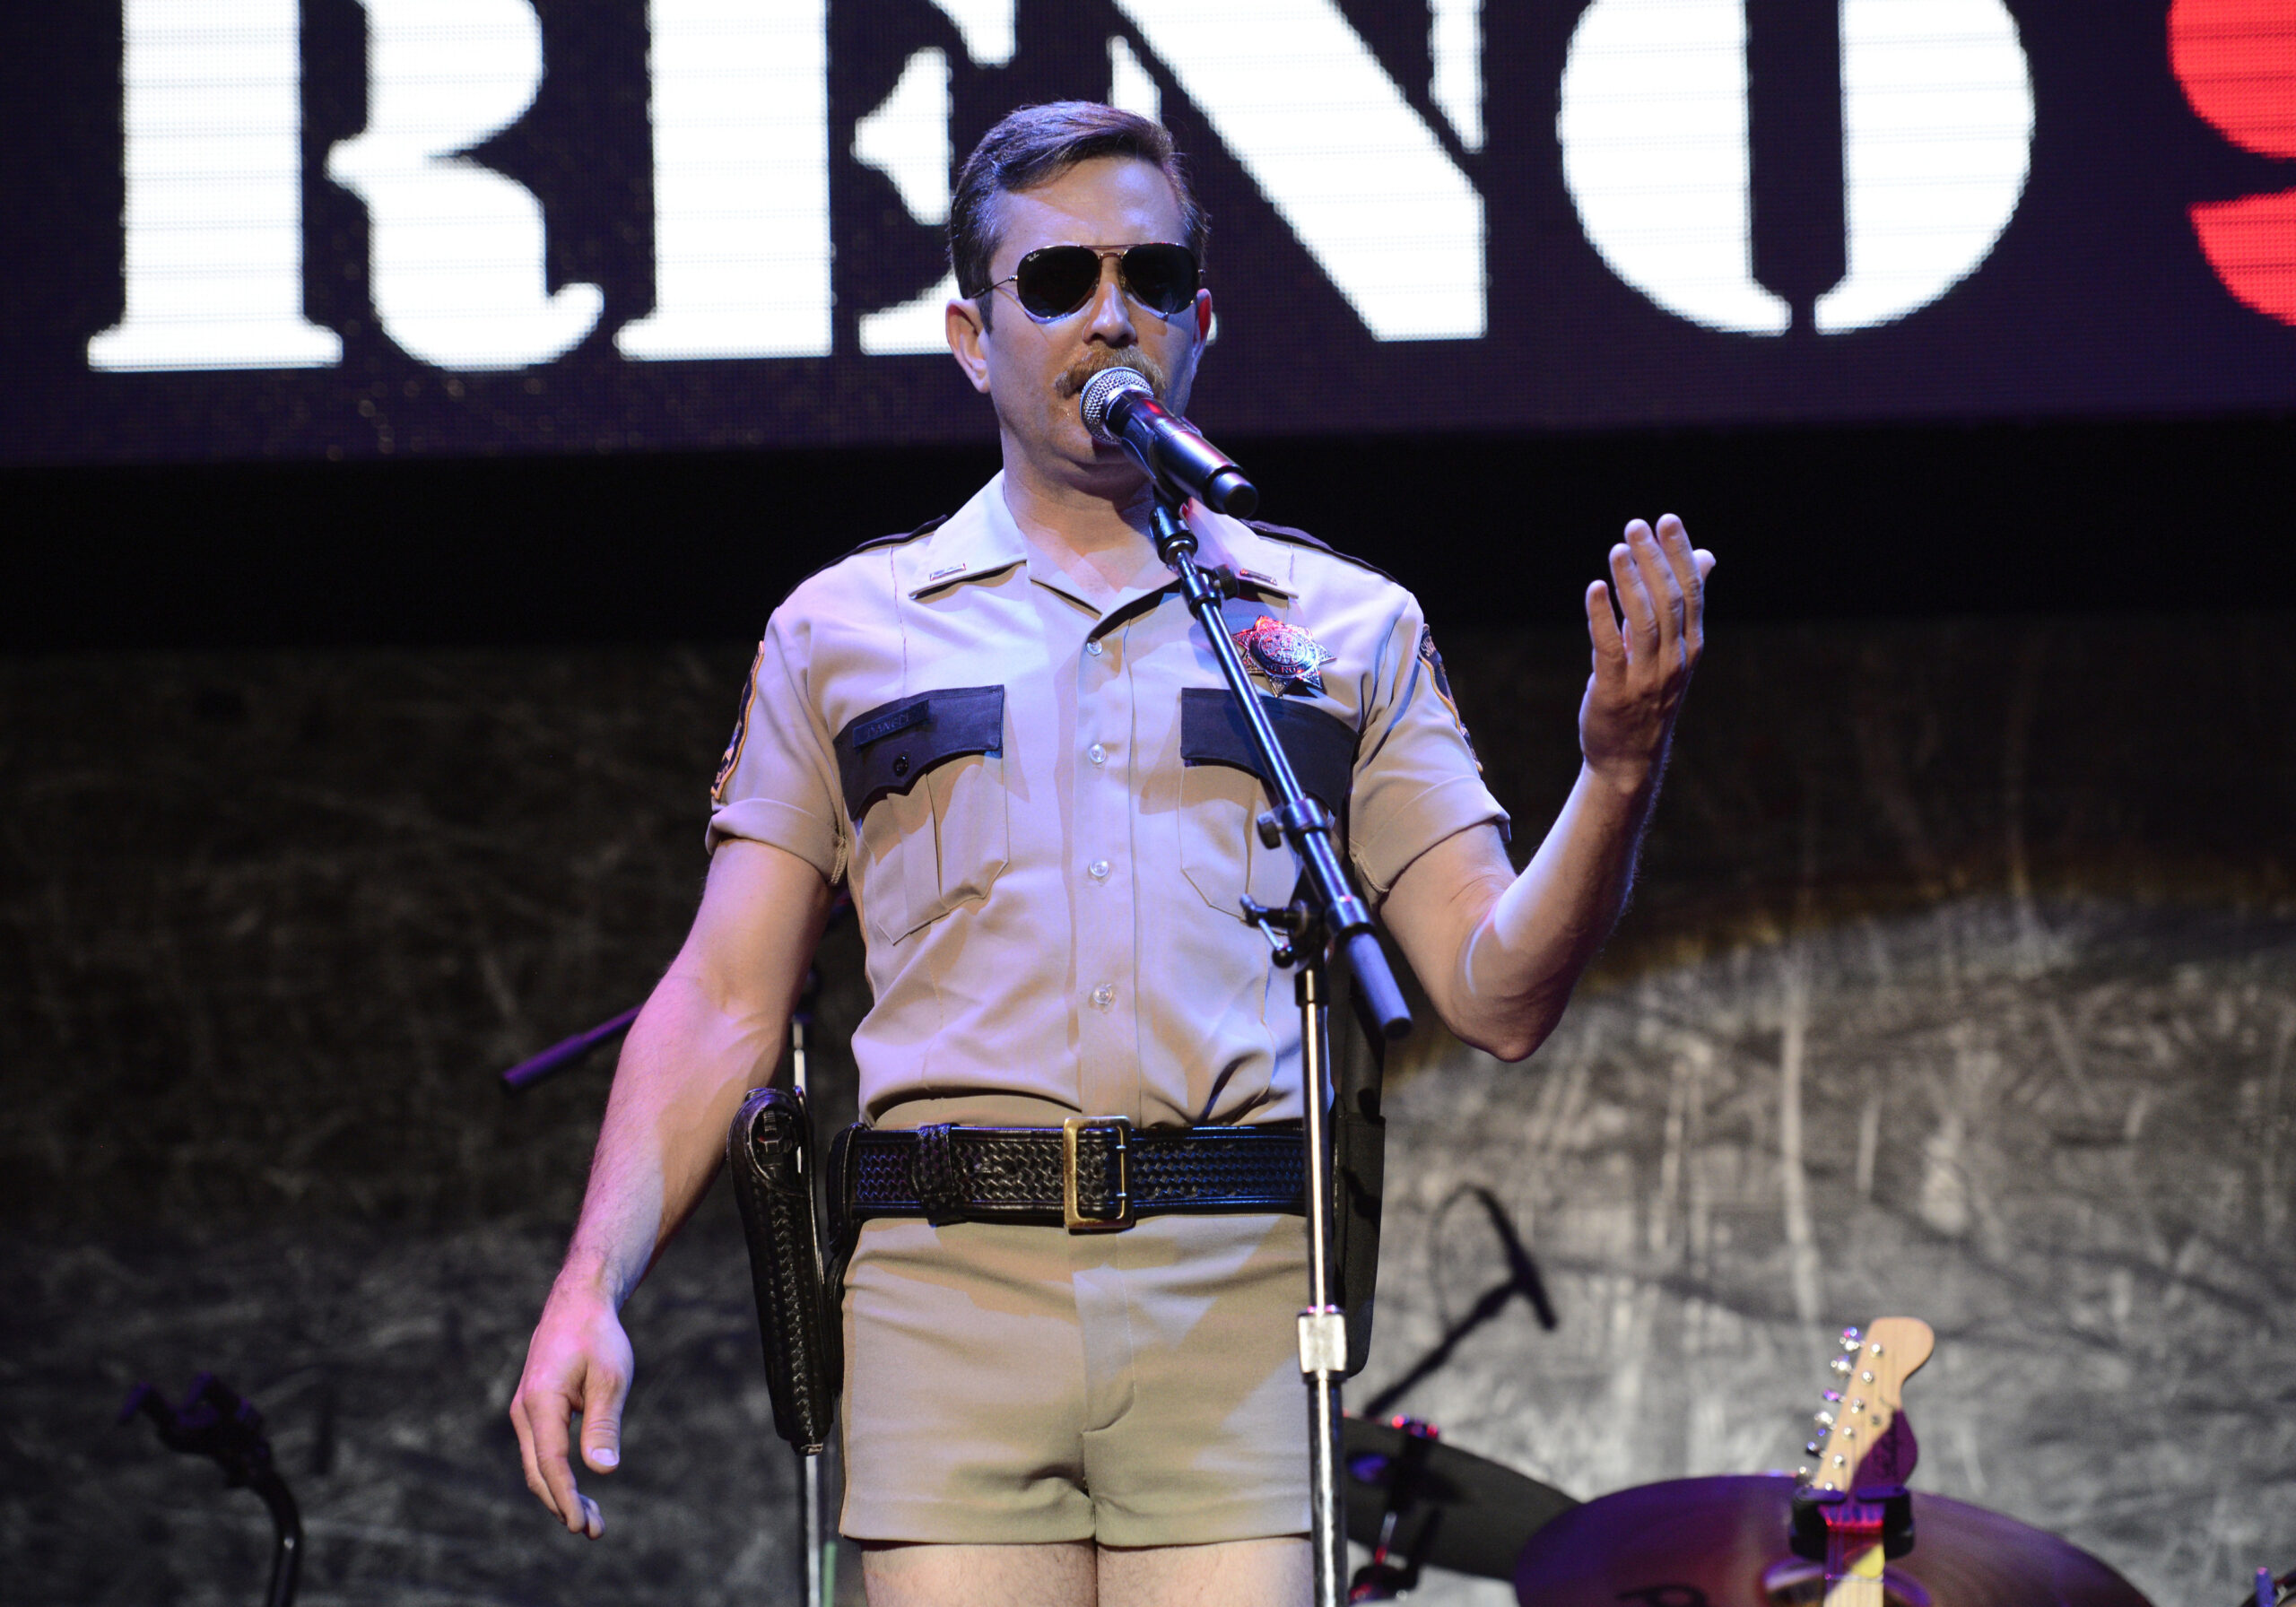 Thomas Lennon performs on stage Wednesday, March 25, 2015, in Hollywood, Calif